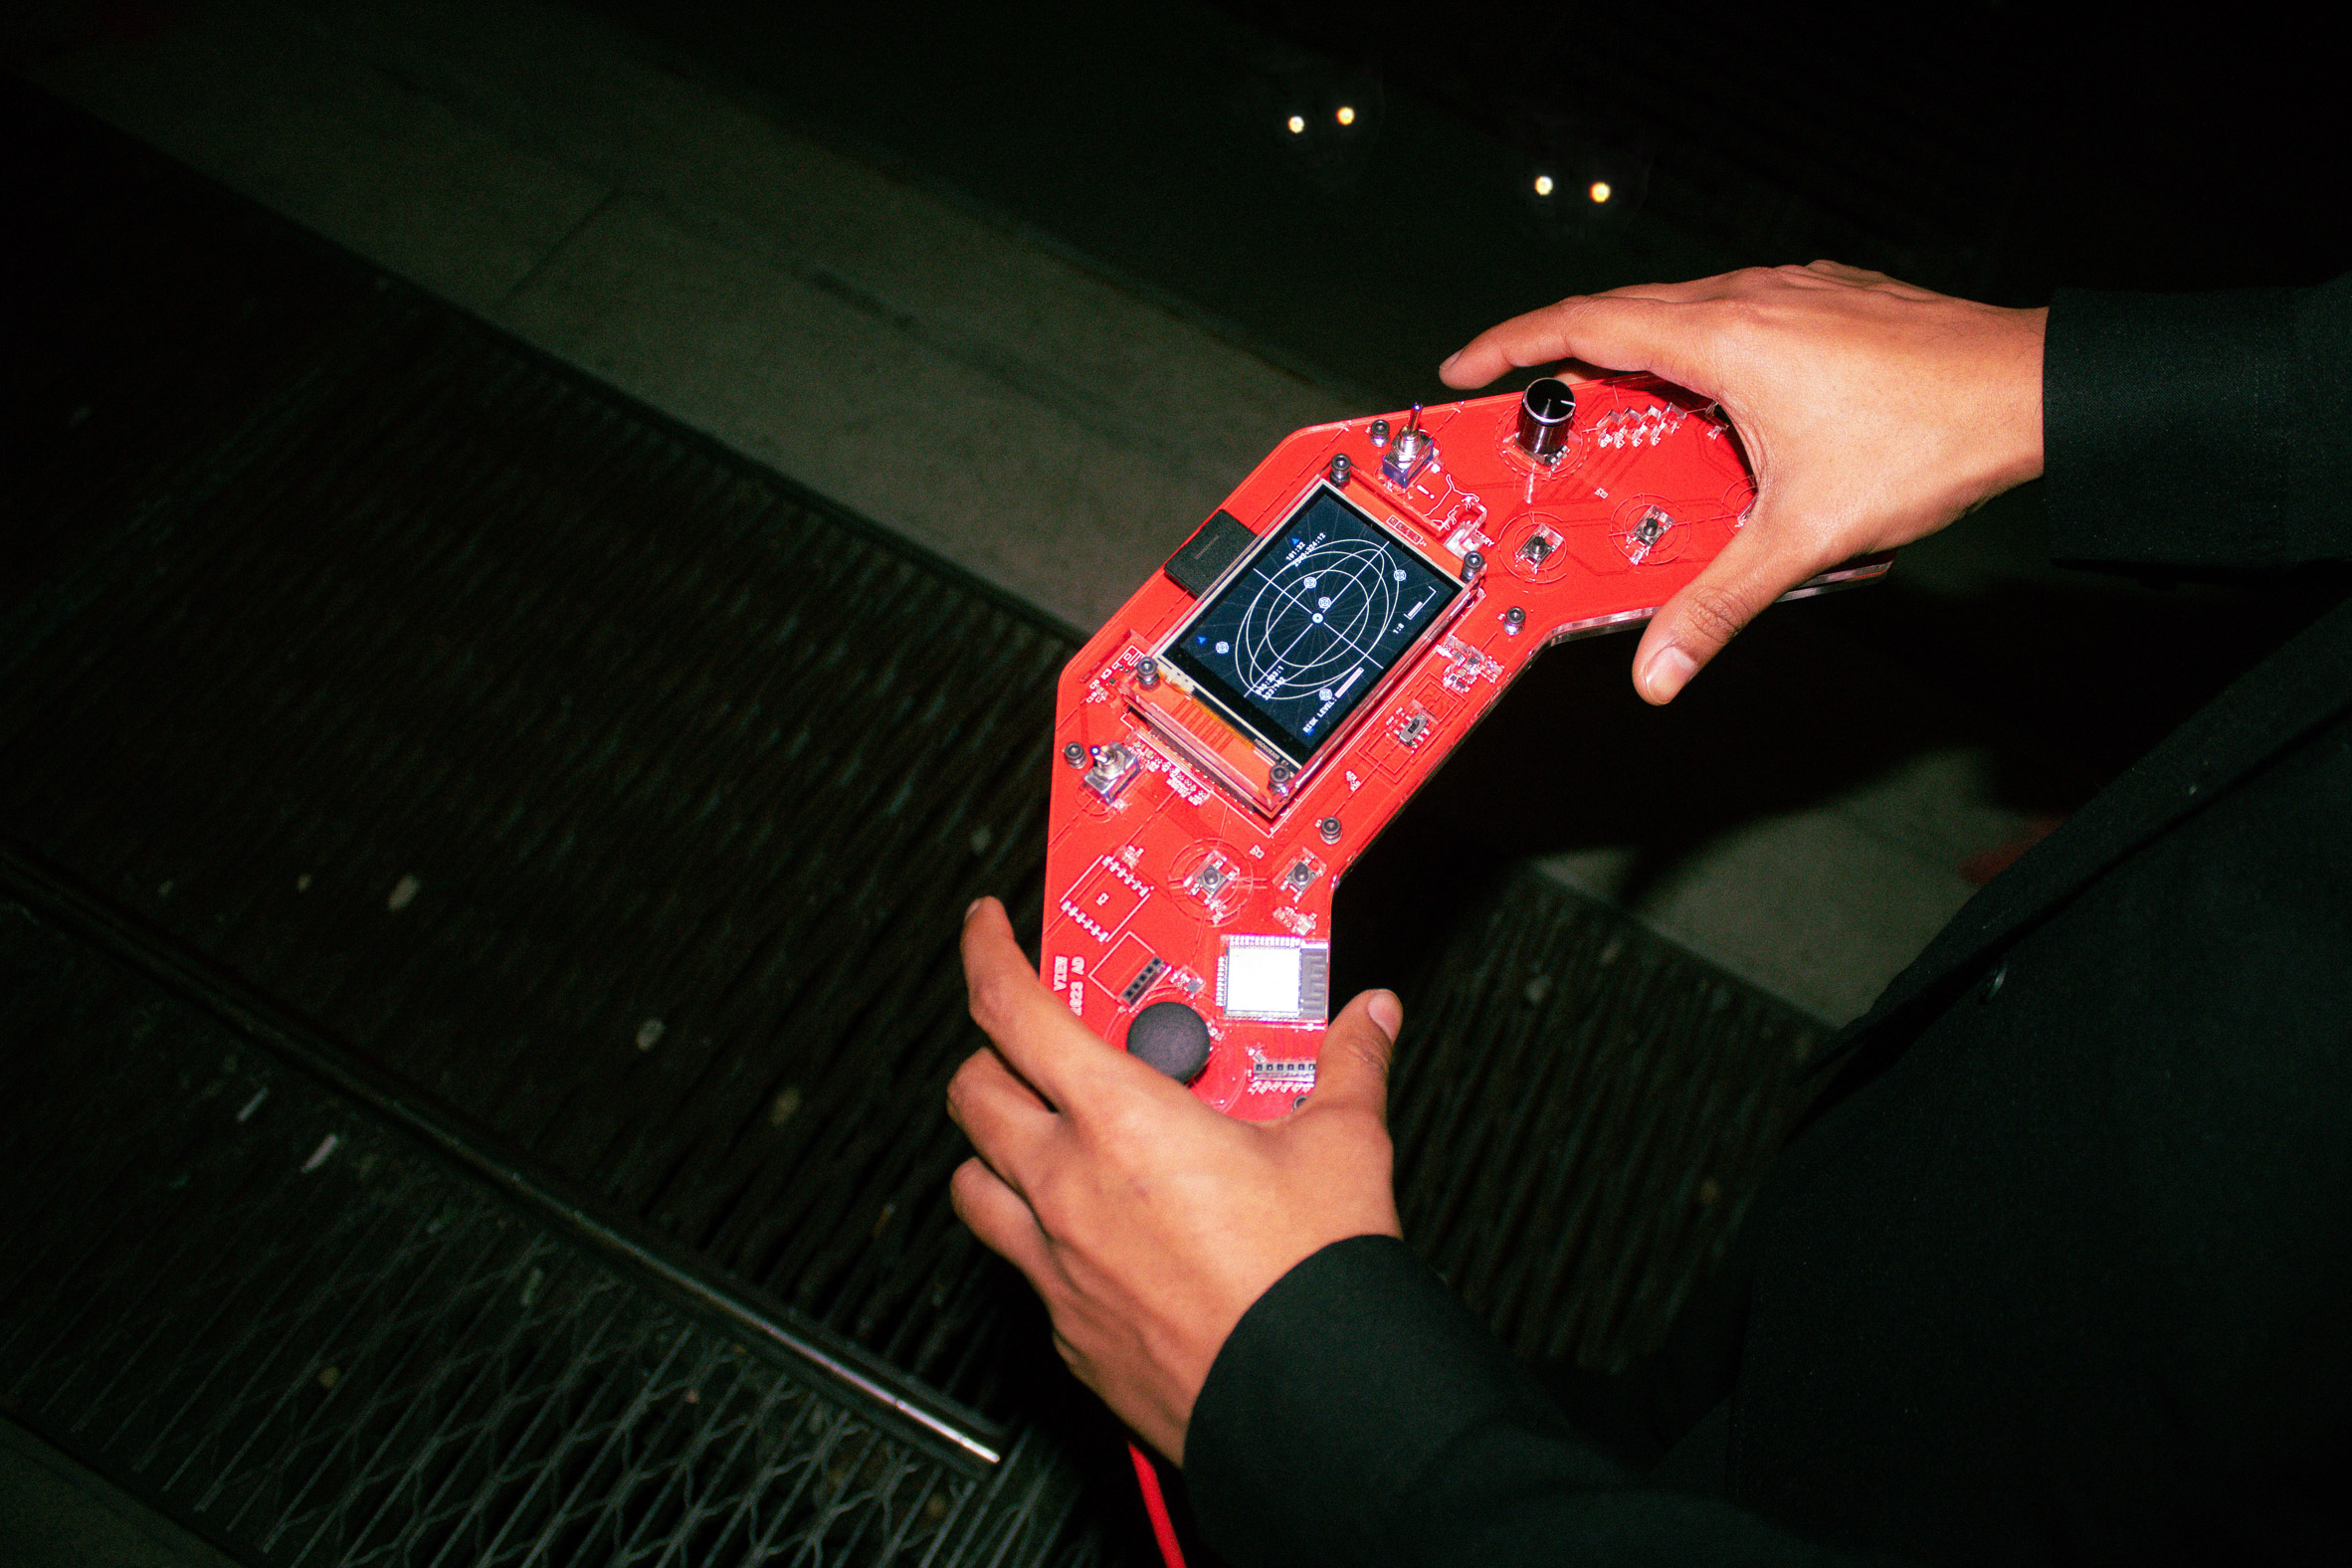 red hand held device similar to gameboy